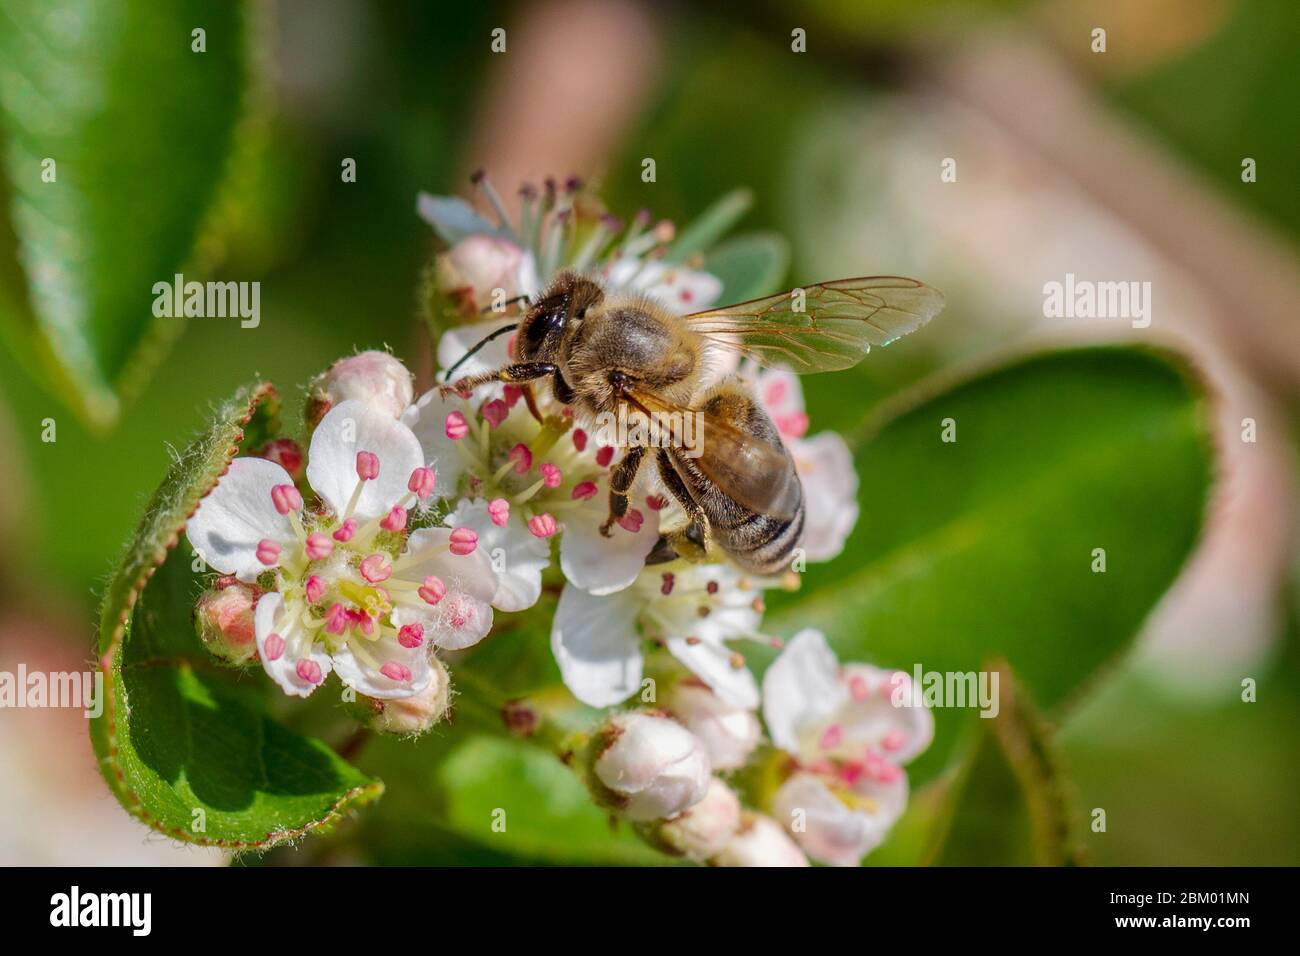 Closeup view of Honey bee on a blooming Aronia flowers in the spring morning. Stock Photo